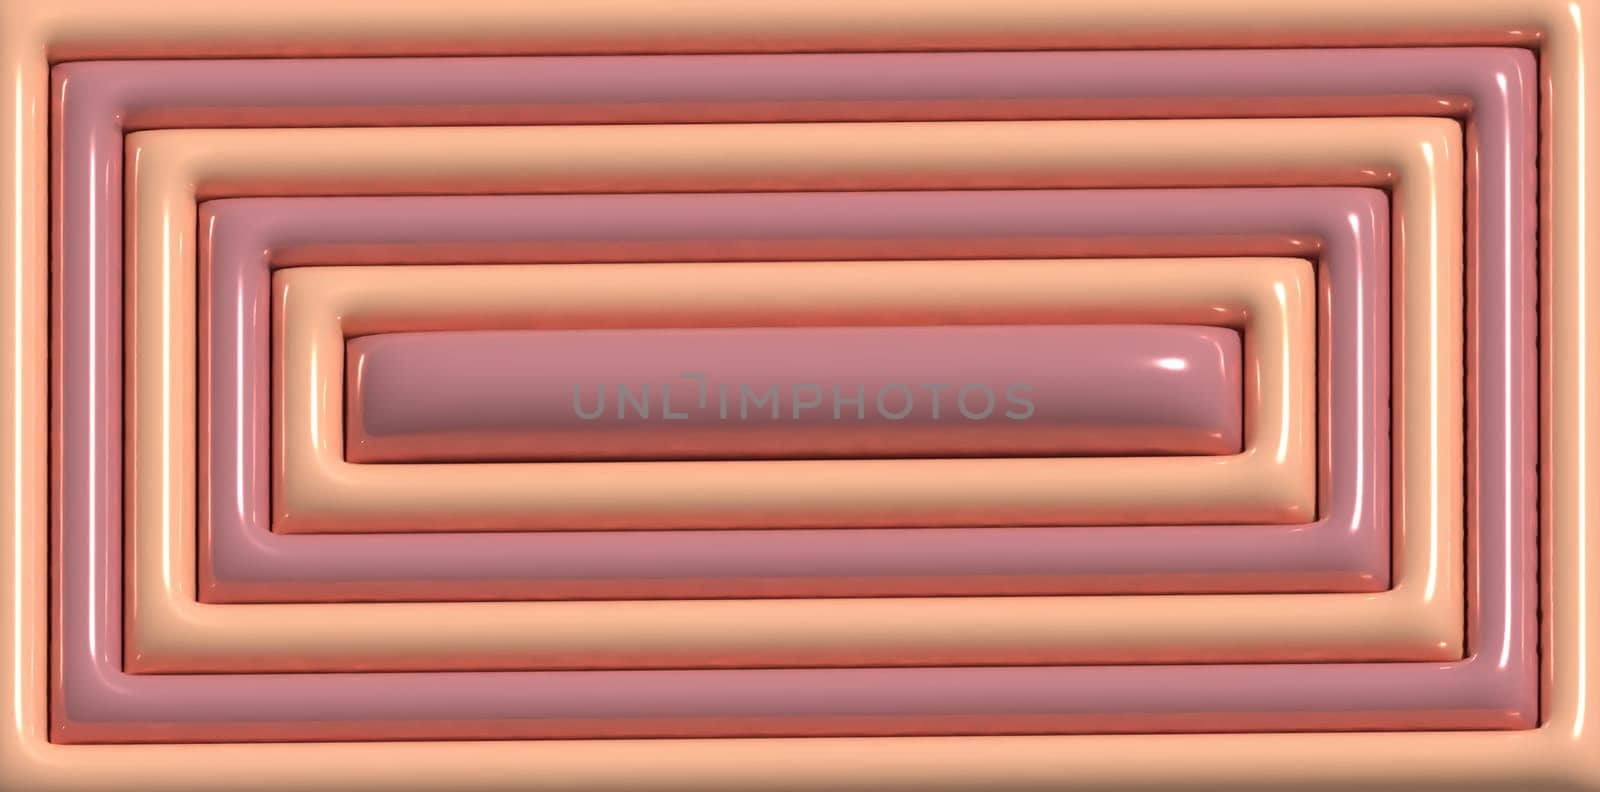 Pink inflated rectangular shapes, 3D rendering illustration by ndanko